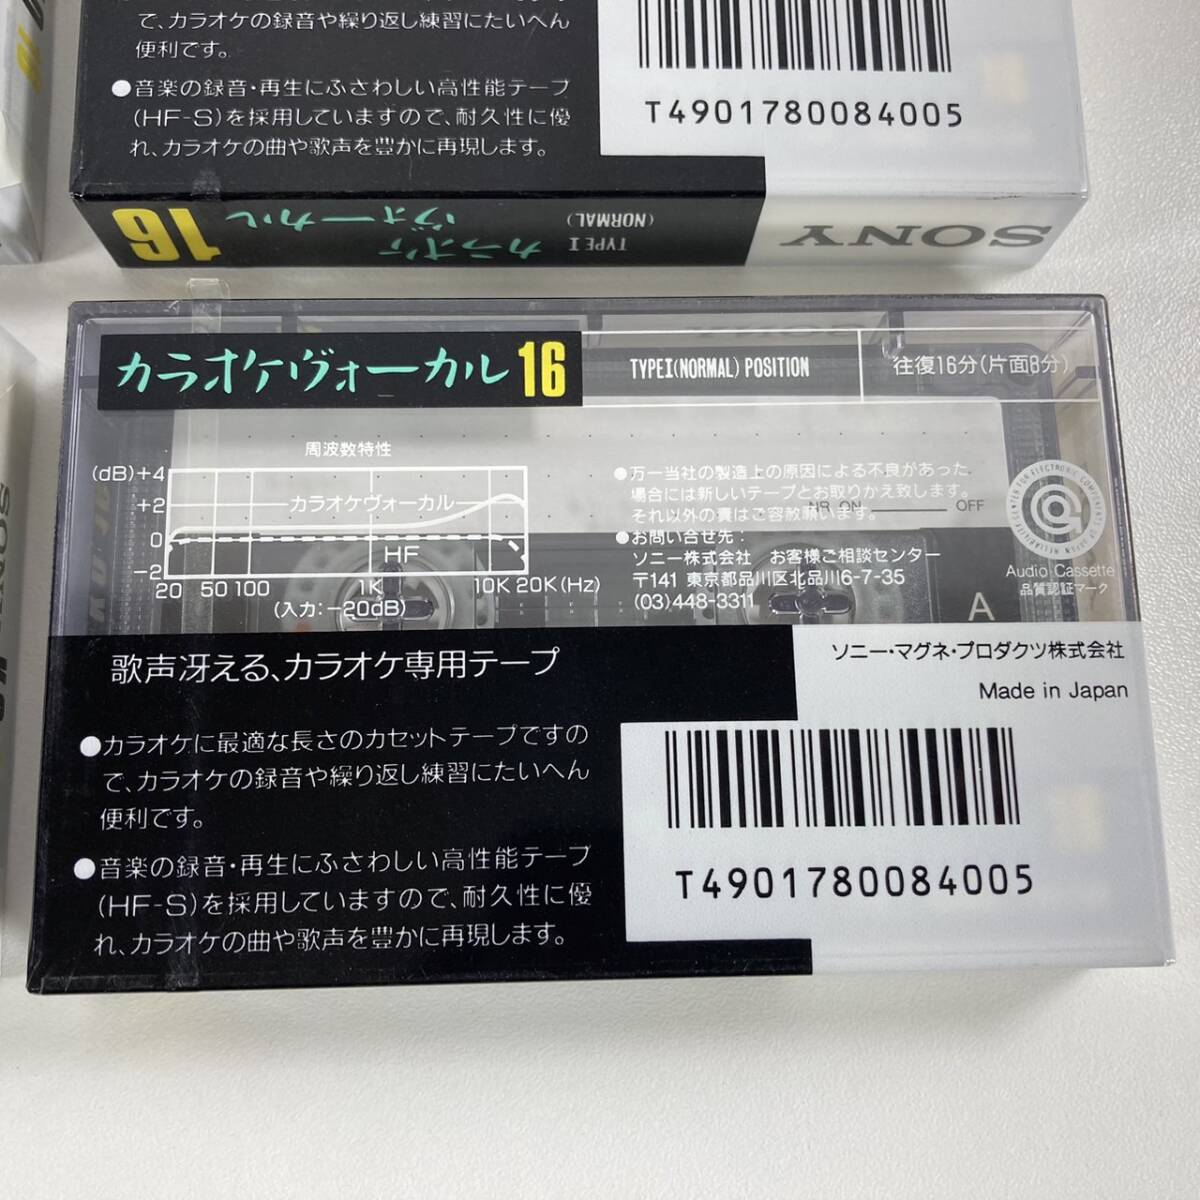  unopened goods SONY karaoke vo-karu for cassette tape KO16 TYPE1 normal position 4 pcs set that time thing retro 